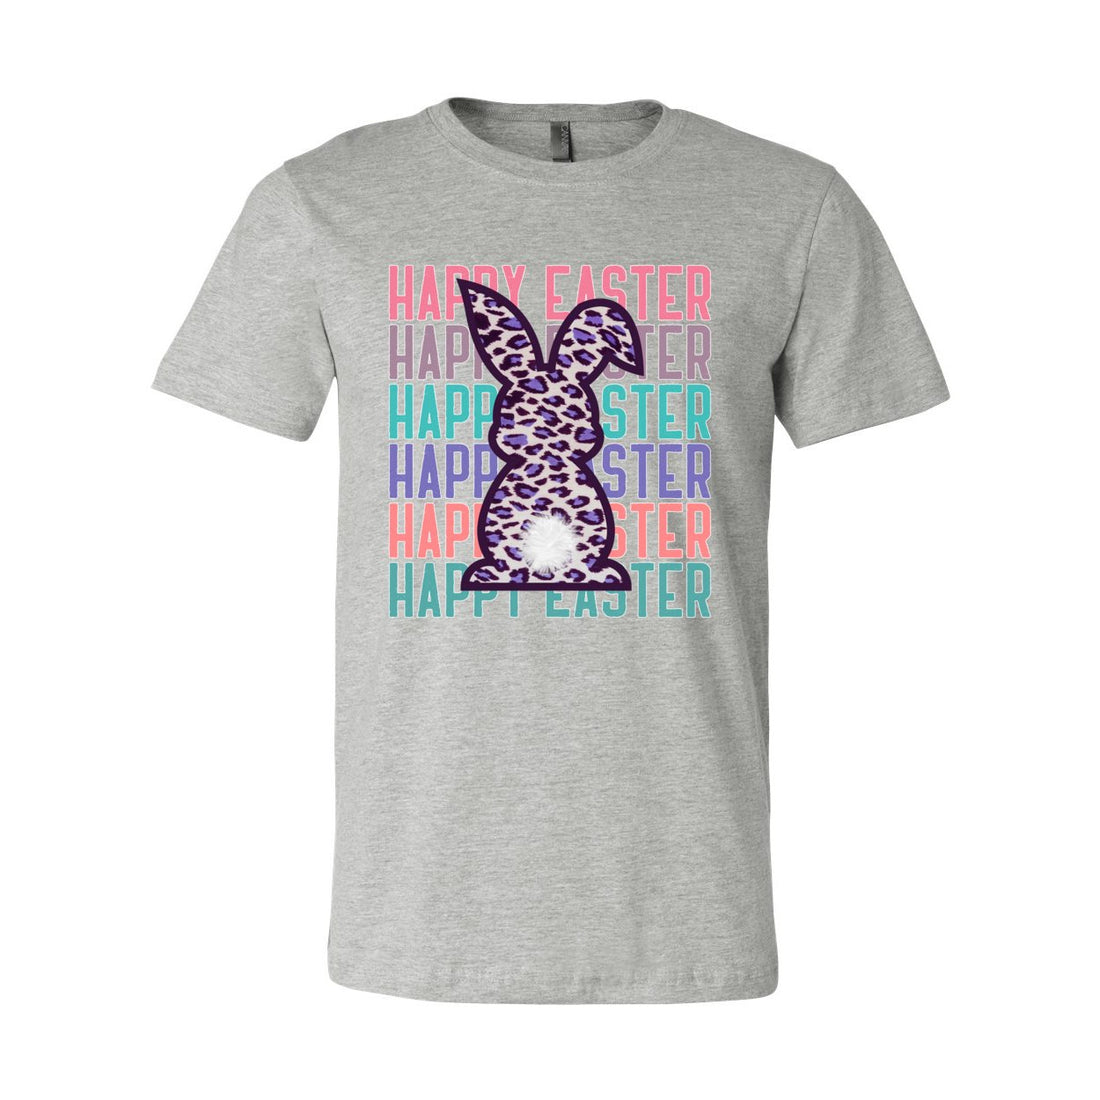 Happy Easter Repeat Tee - T-Shirts - Positively Sassy - Happy Easter Repeat Tee